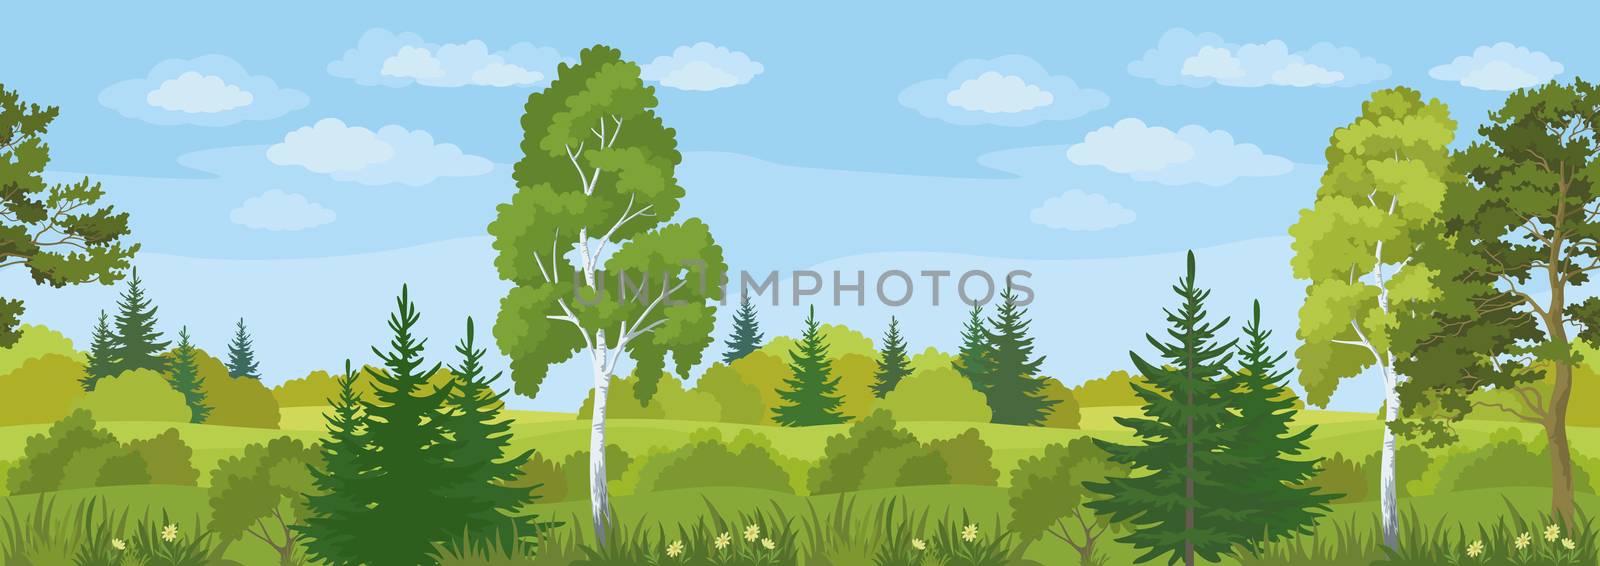 Seamless Horizontal Summer Landscape, Forest with Pines, Birches and Fir Trees, Flowers, Green Grass and Blue Sky with Clouds. 